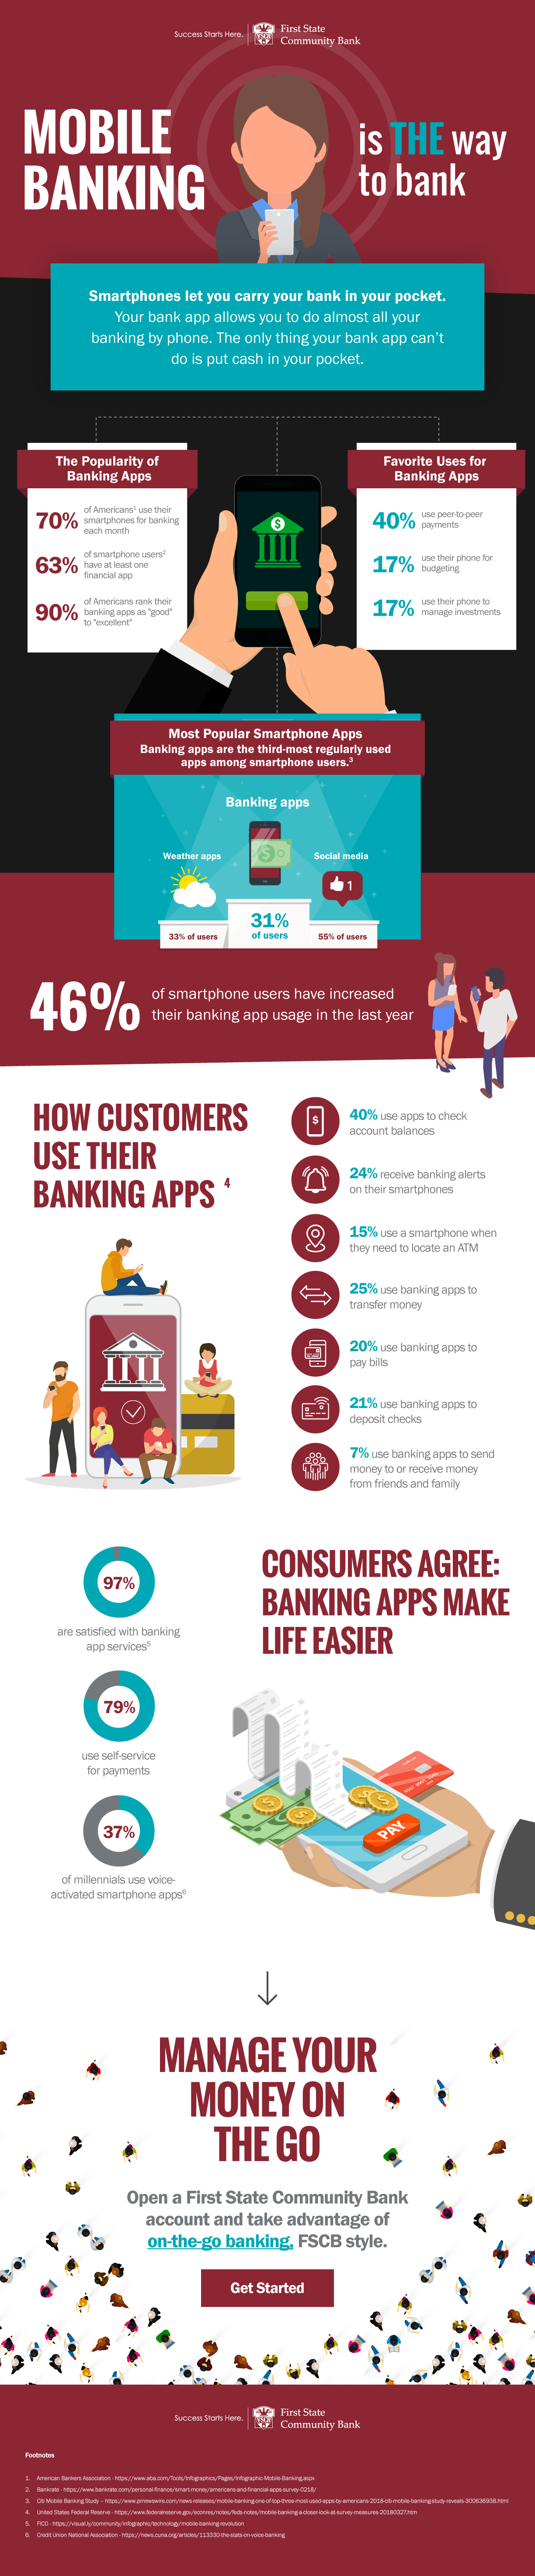 FSCB Infographic - Mobile Banking is THE Way to Bank - 